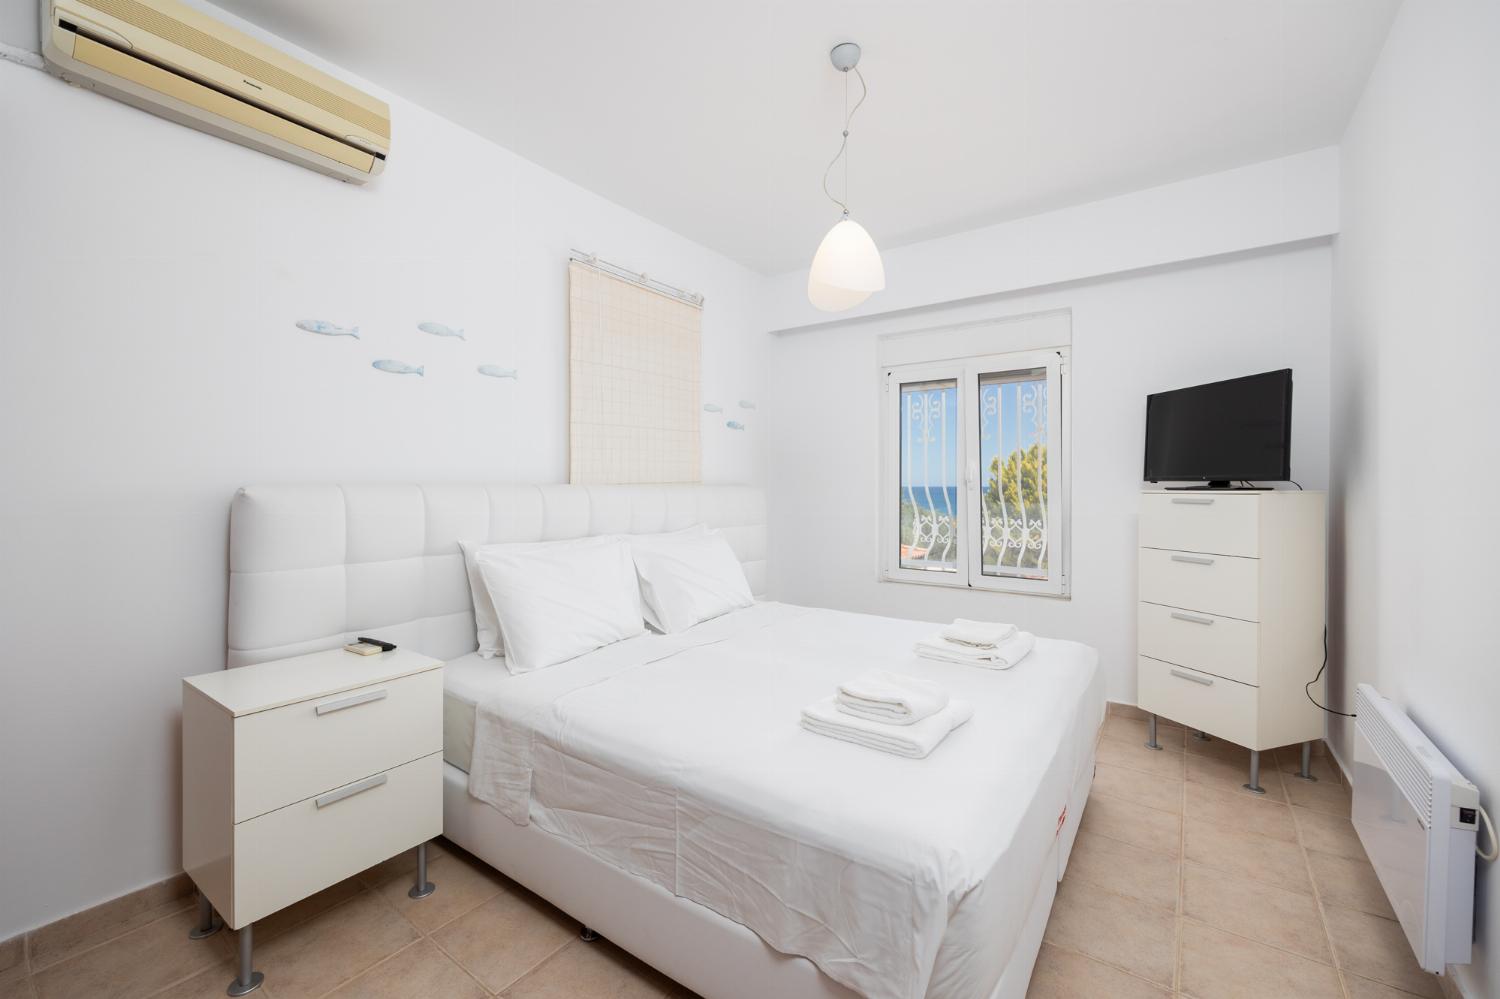 Main building: double bedroom with A/C and TV